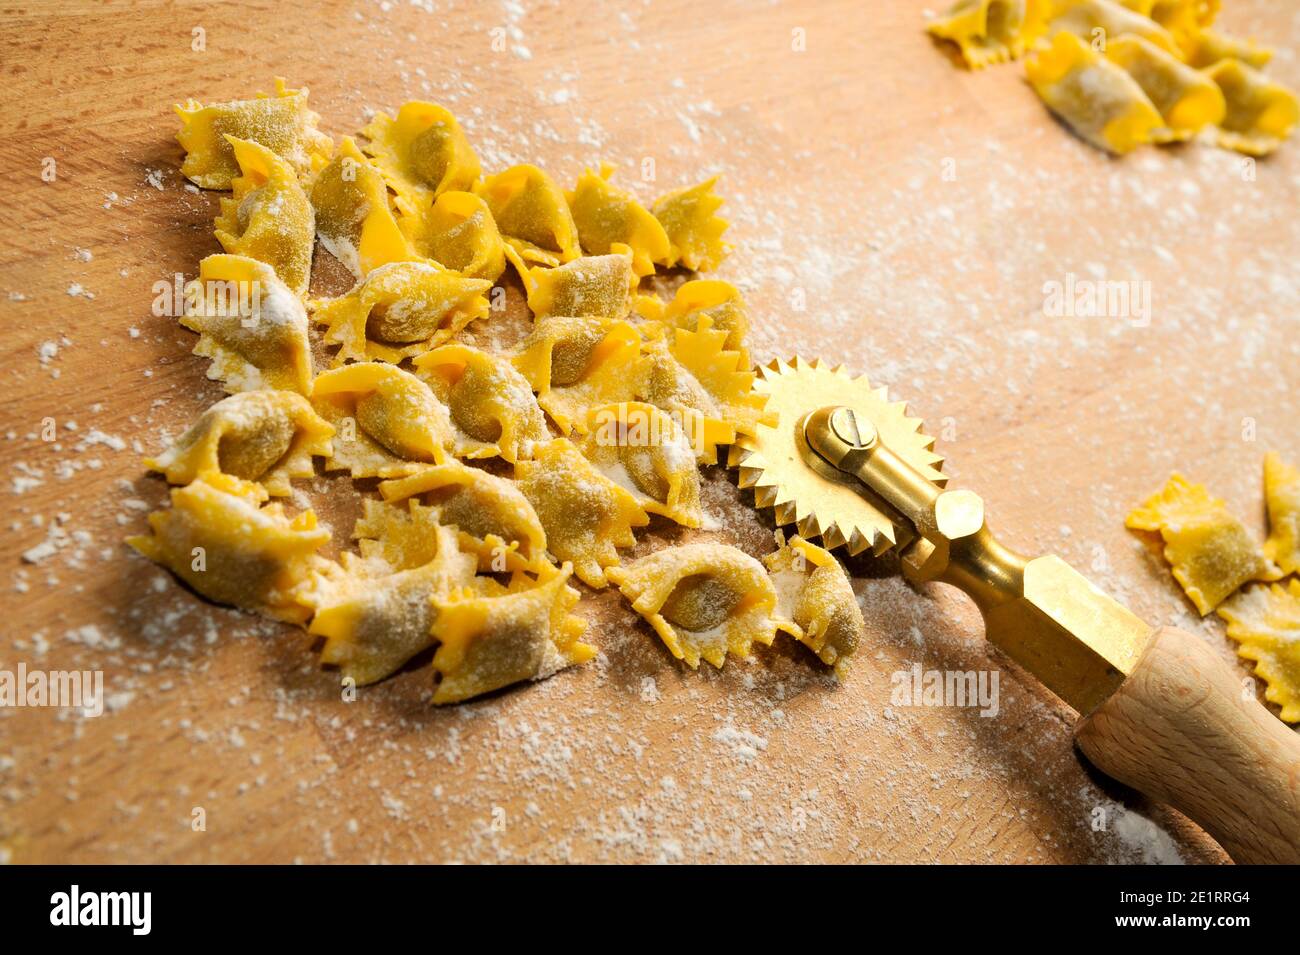 Ravioli del plin, typical pasta from Langhe, Piedmont, Italy - agnolotti with wheel knife on wooden cutting board Stock Photo